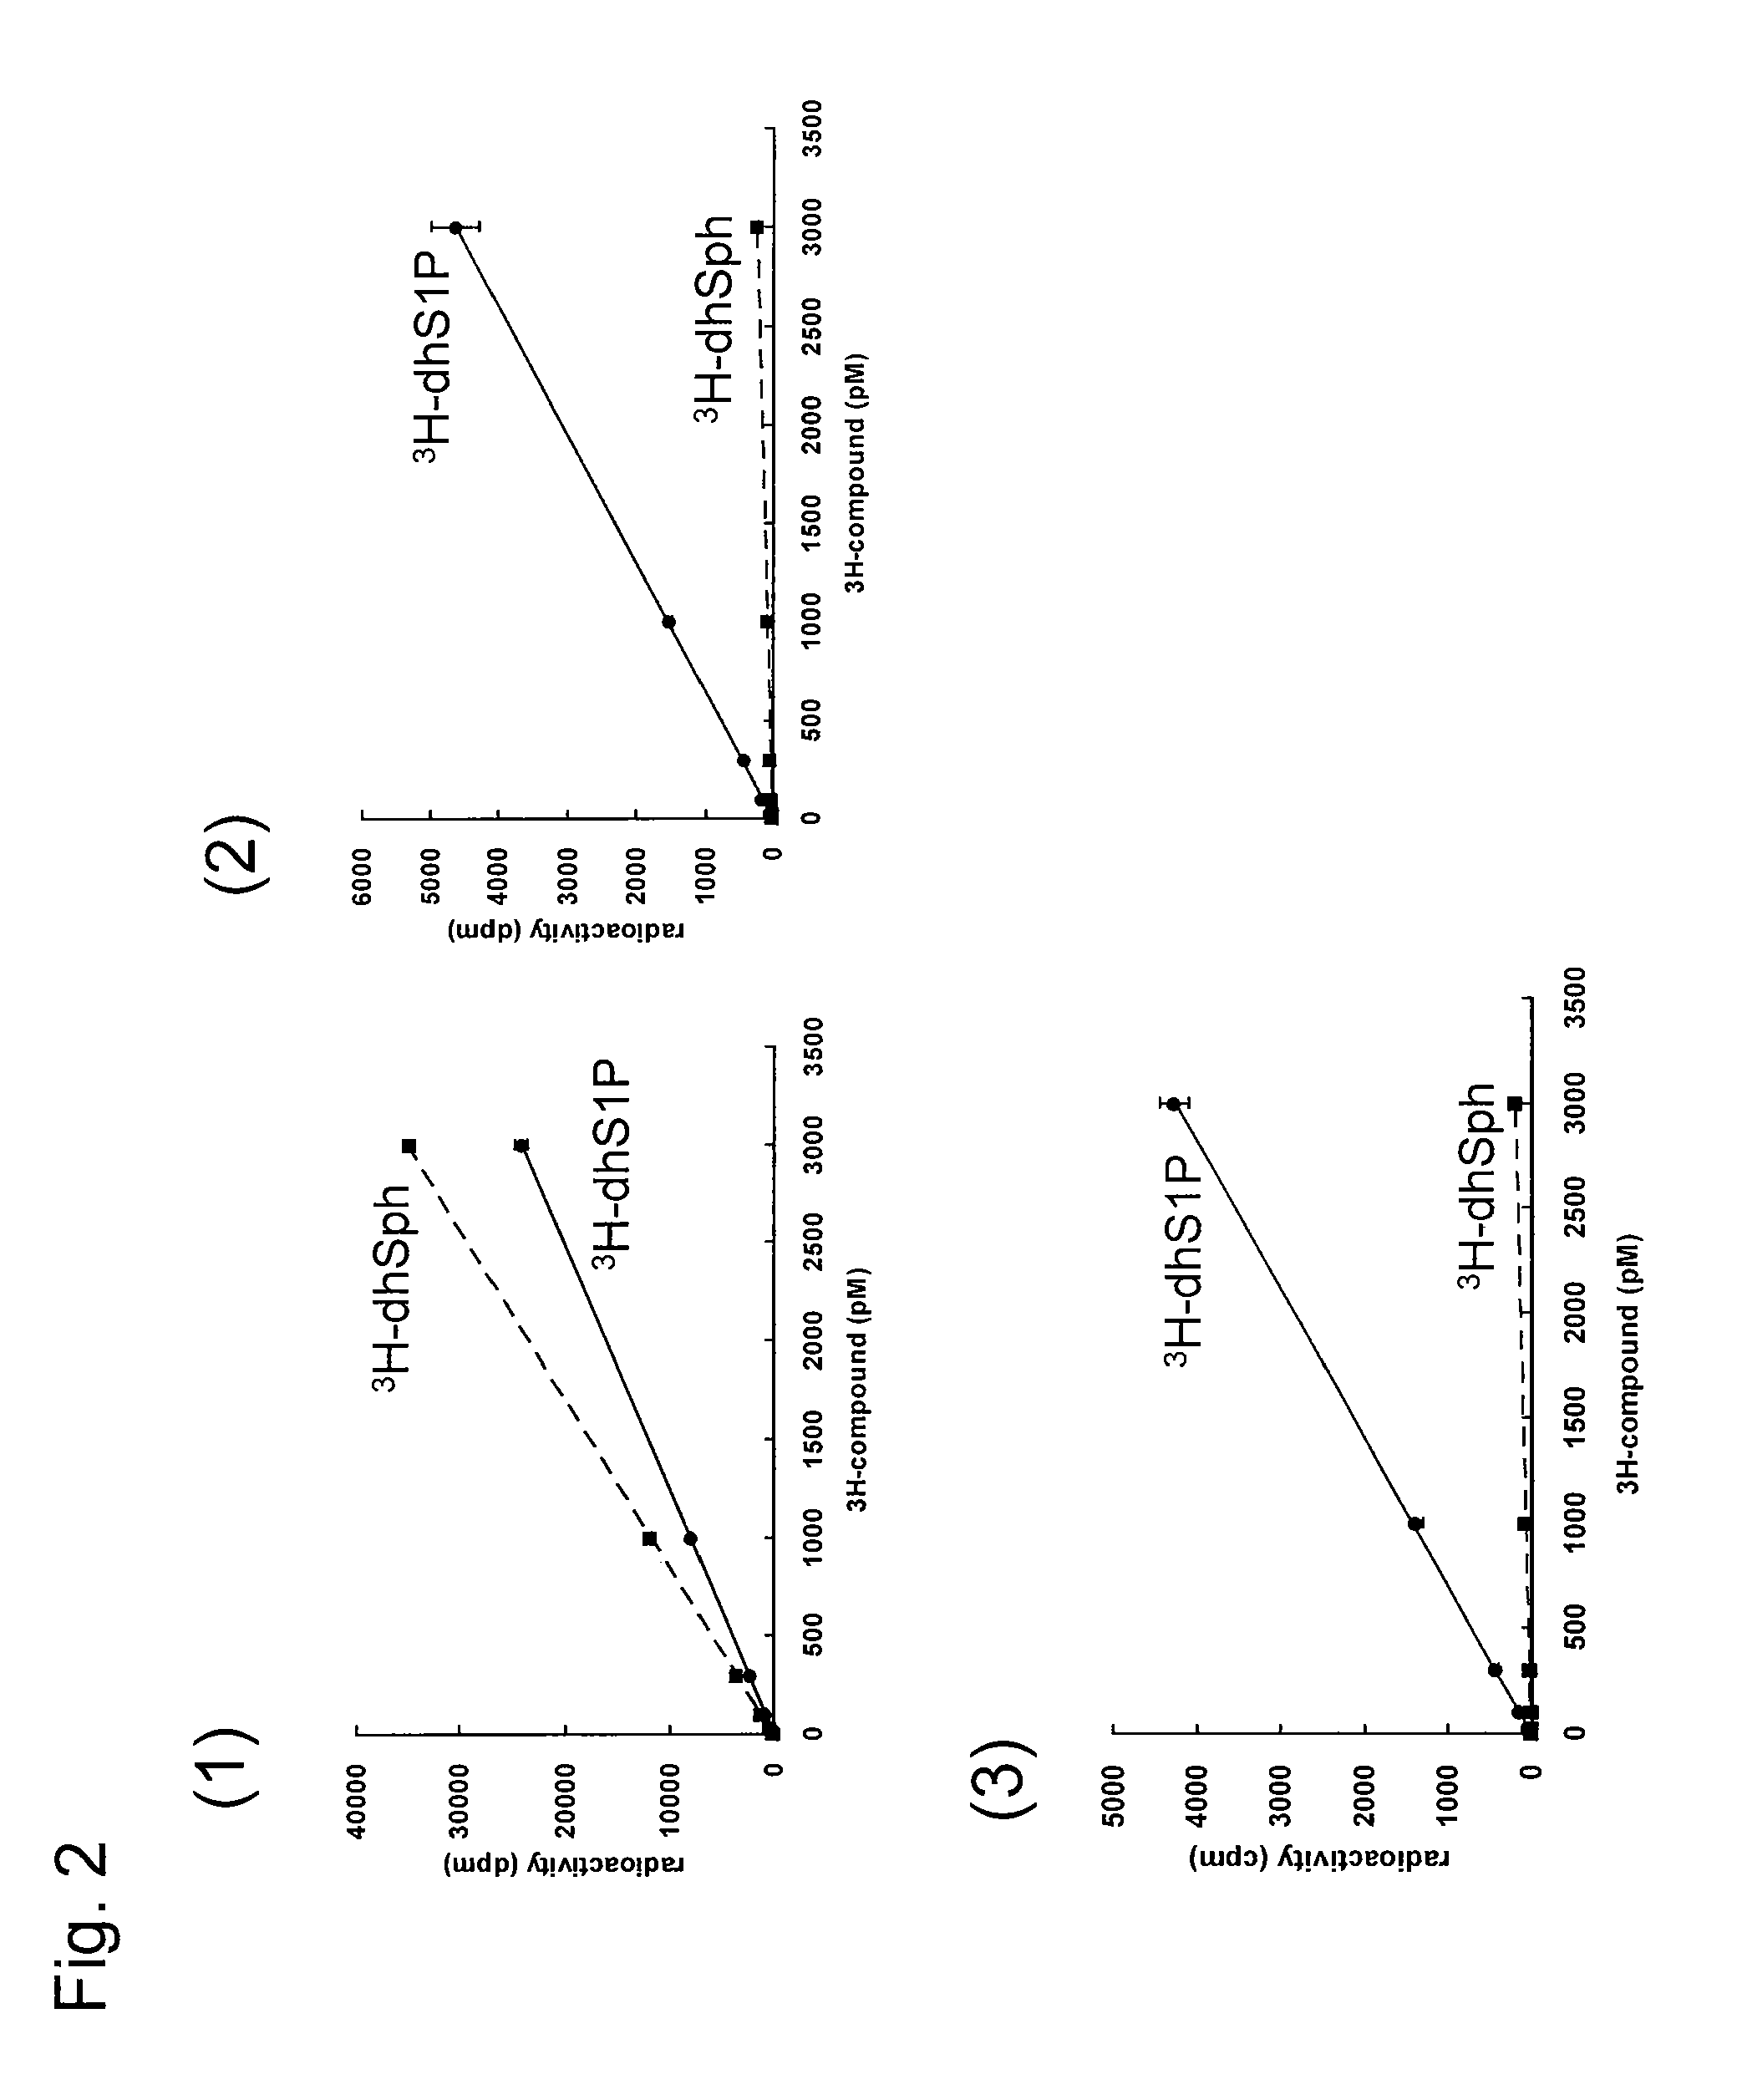 Method for screening for S1P lyase inhibitors using cultured cells